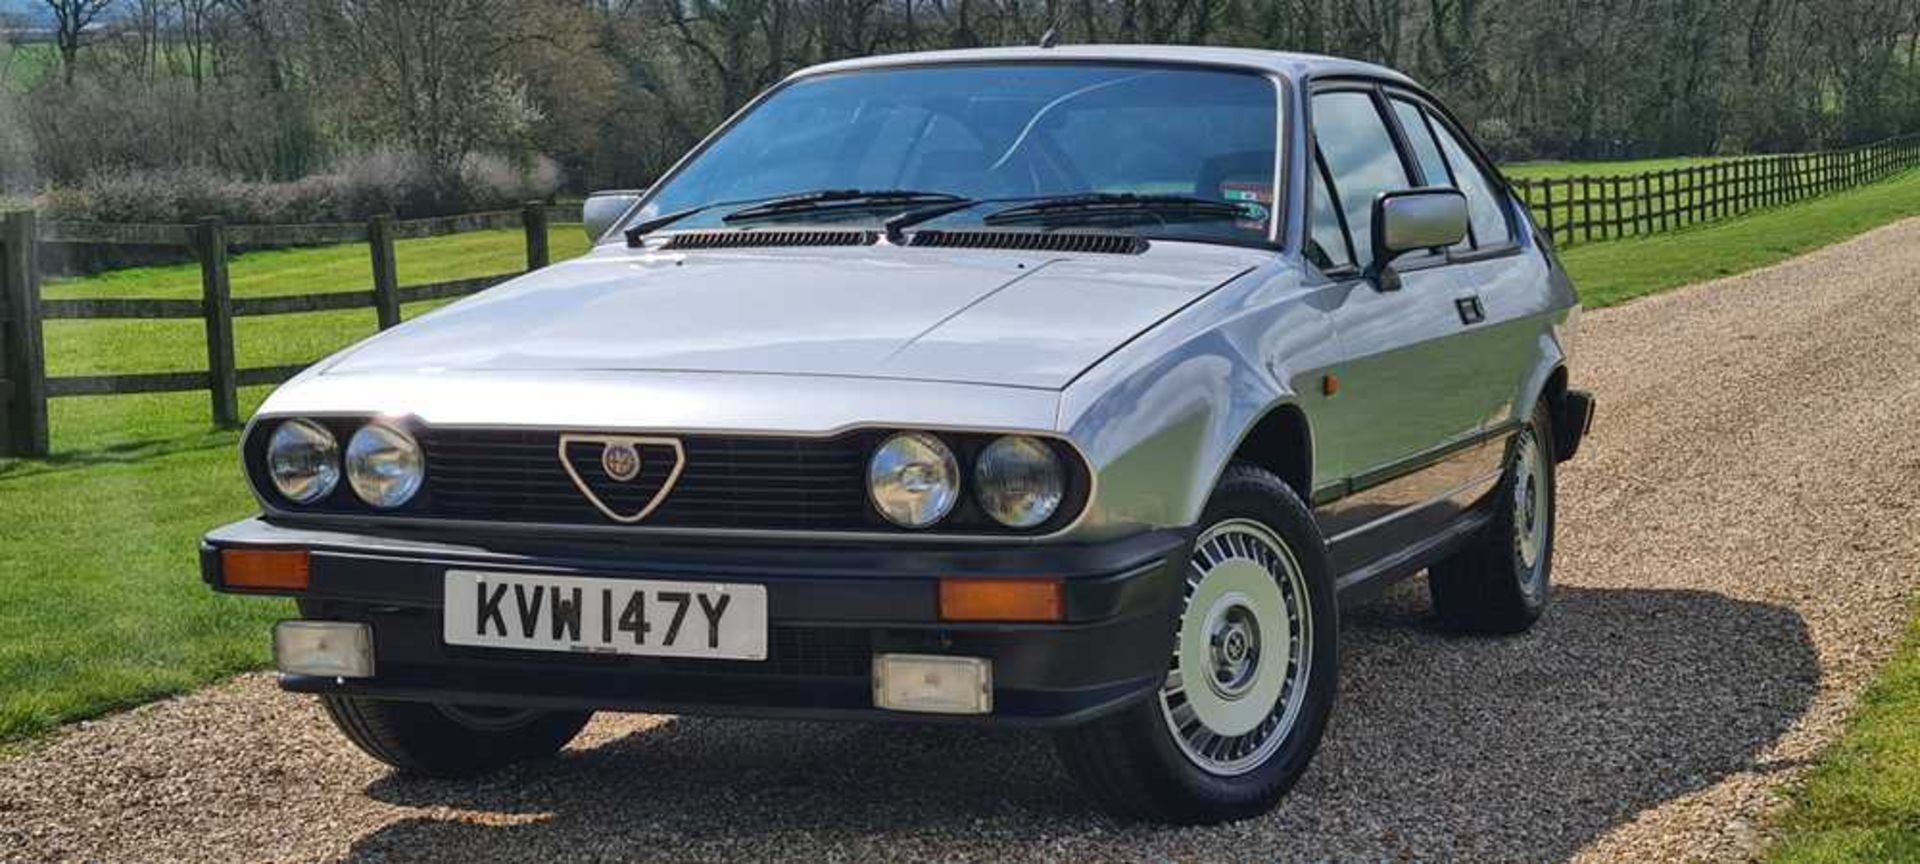 1983 Alfa Romeo GTV 2.0 litre Single family ownership and 48,000 miles from new - Image 14 of 51